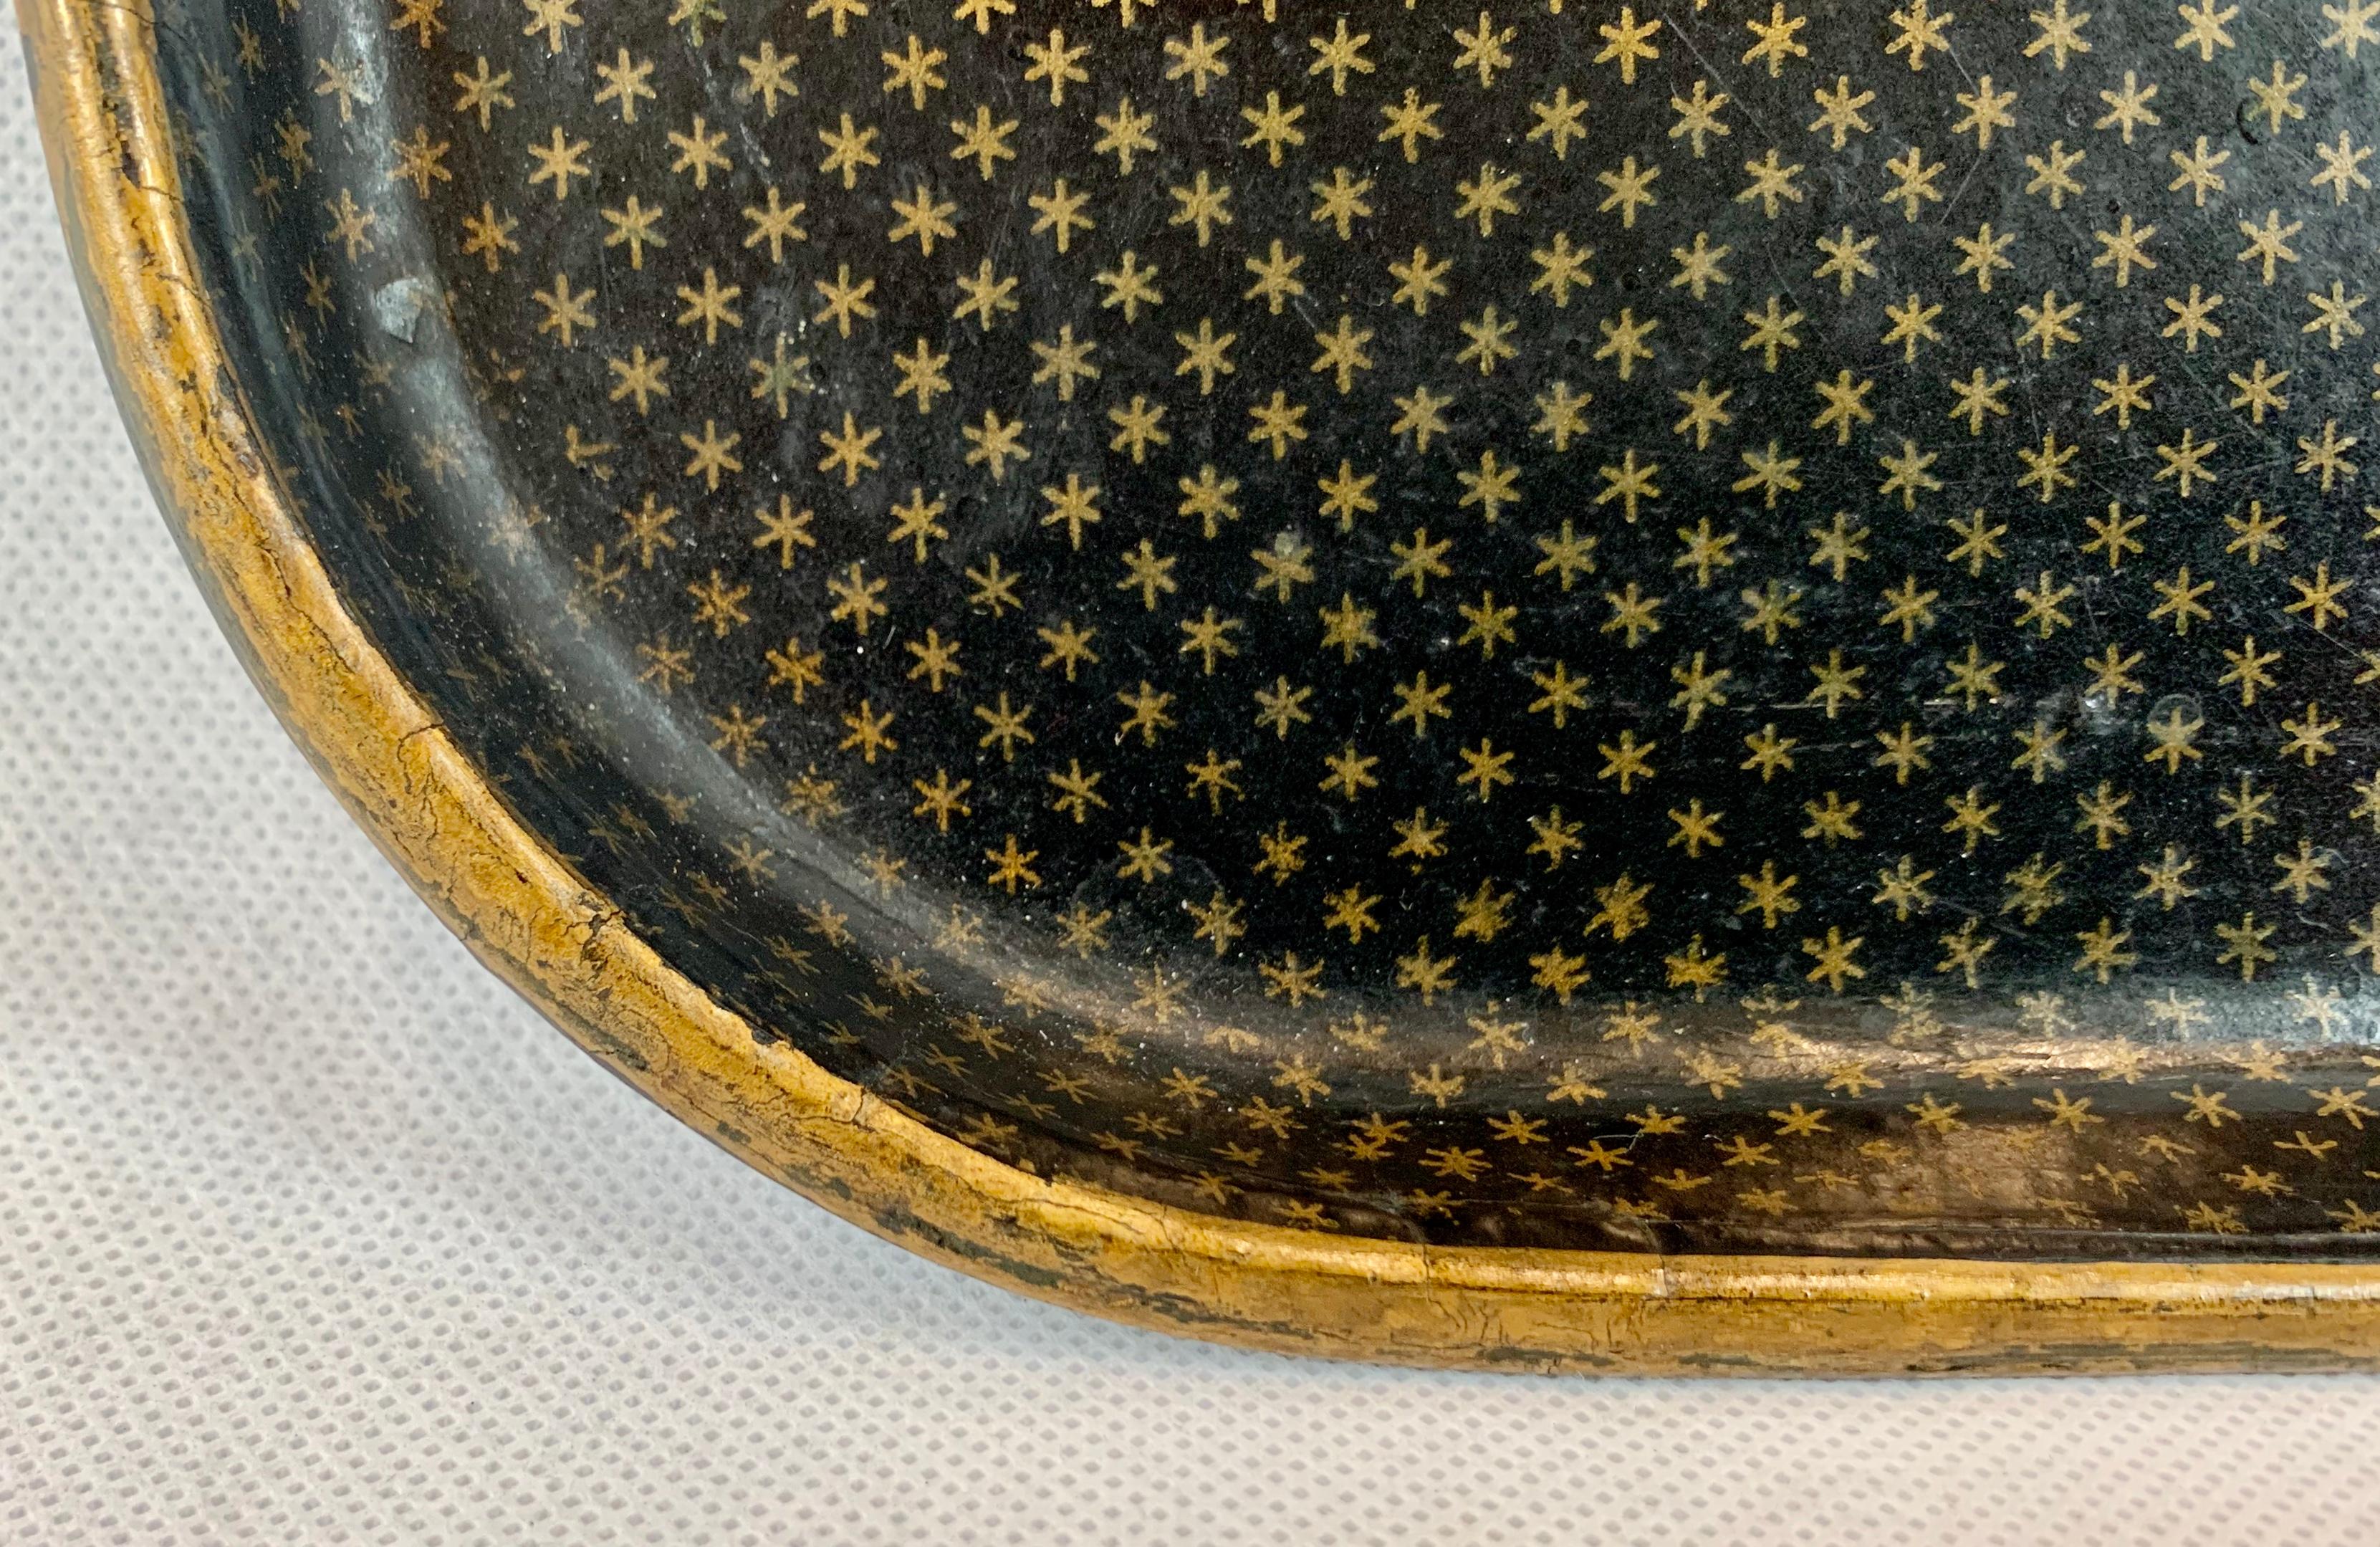 French papier-mâché rectangular tray with rounded corners in the gold star pattern that was so popular during the Napoleon III period. These trays were originally referred to as tea trays, but of course today the choice of use is up to you. In very